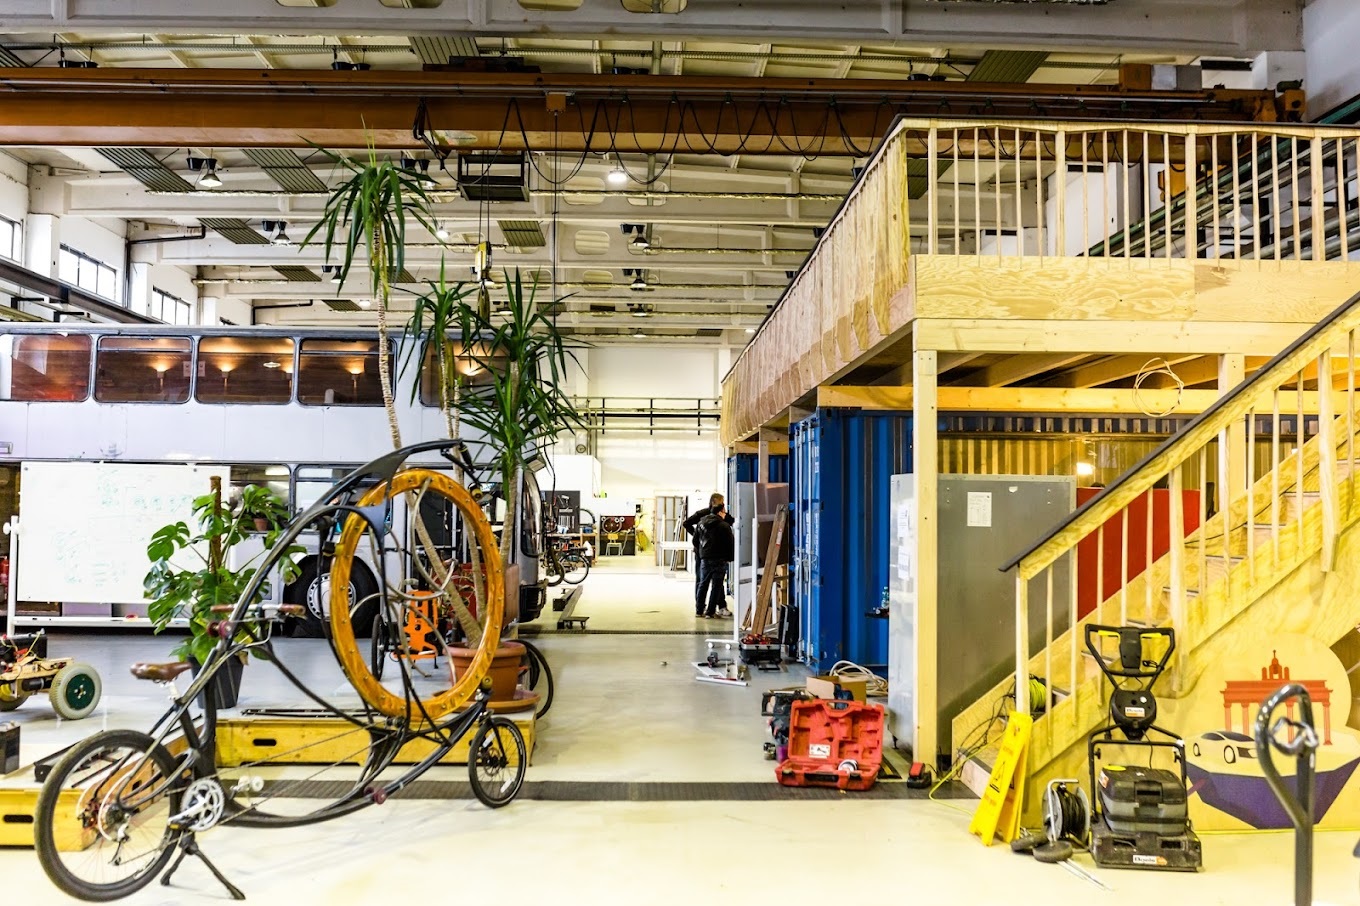 The inside a large building with a bus, bikes and other objects for urban mobility.